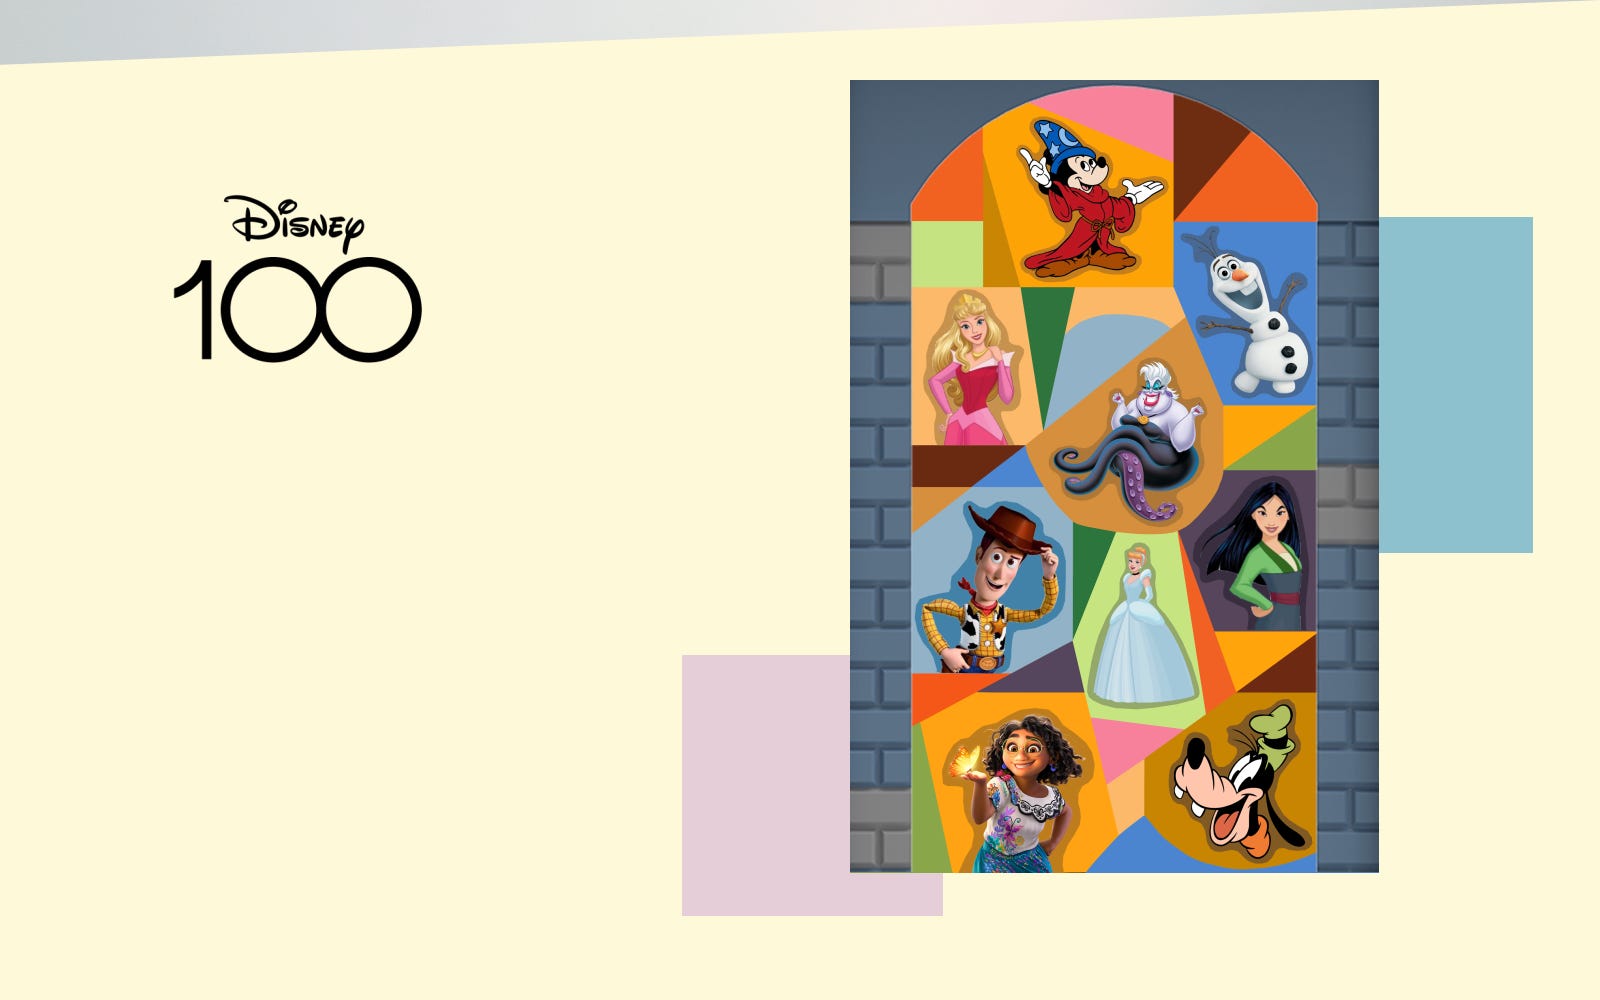 LEGO Disney 100 sets celebrate Classic Animation and more